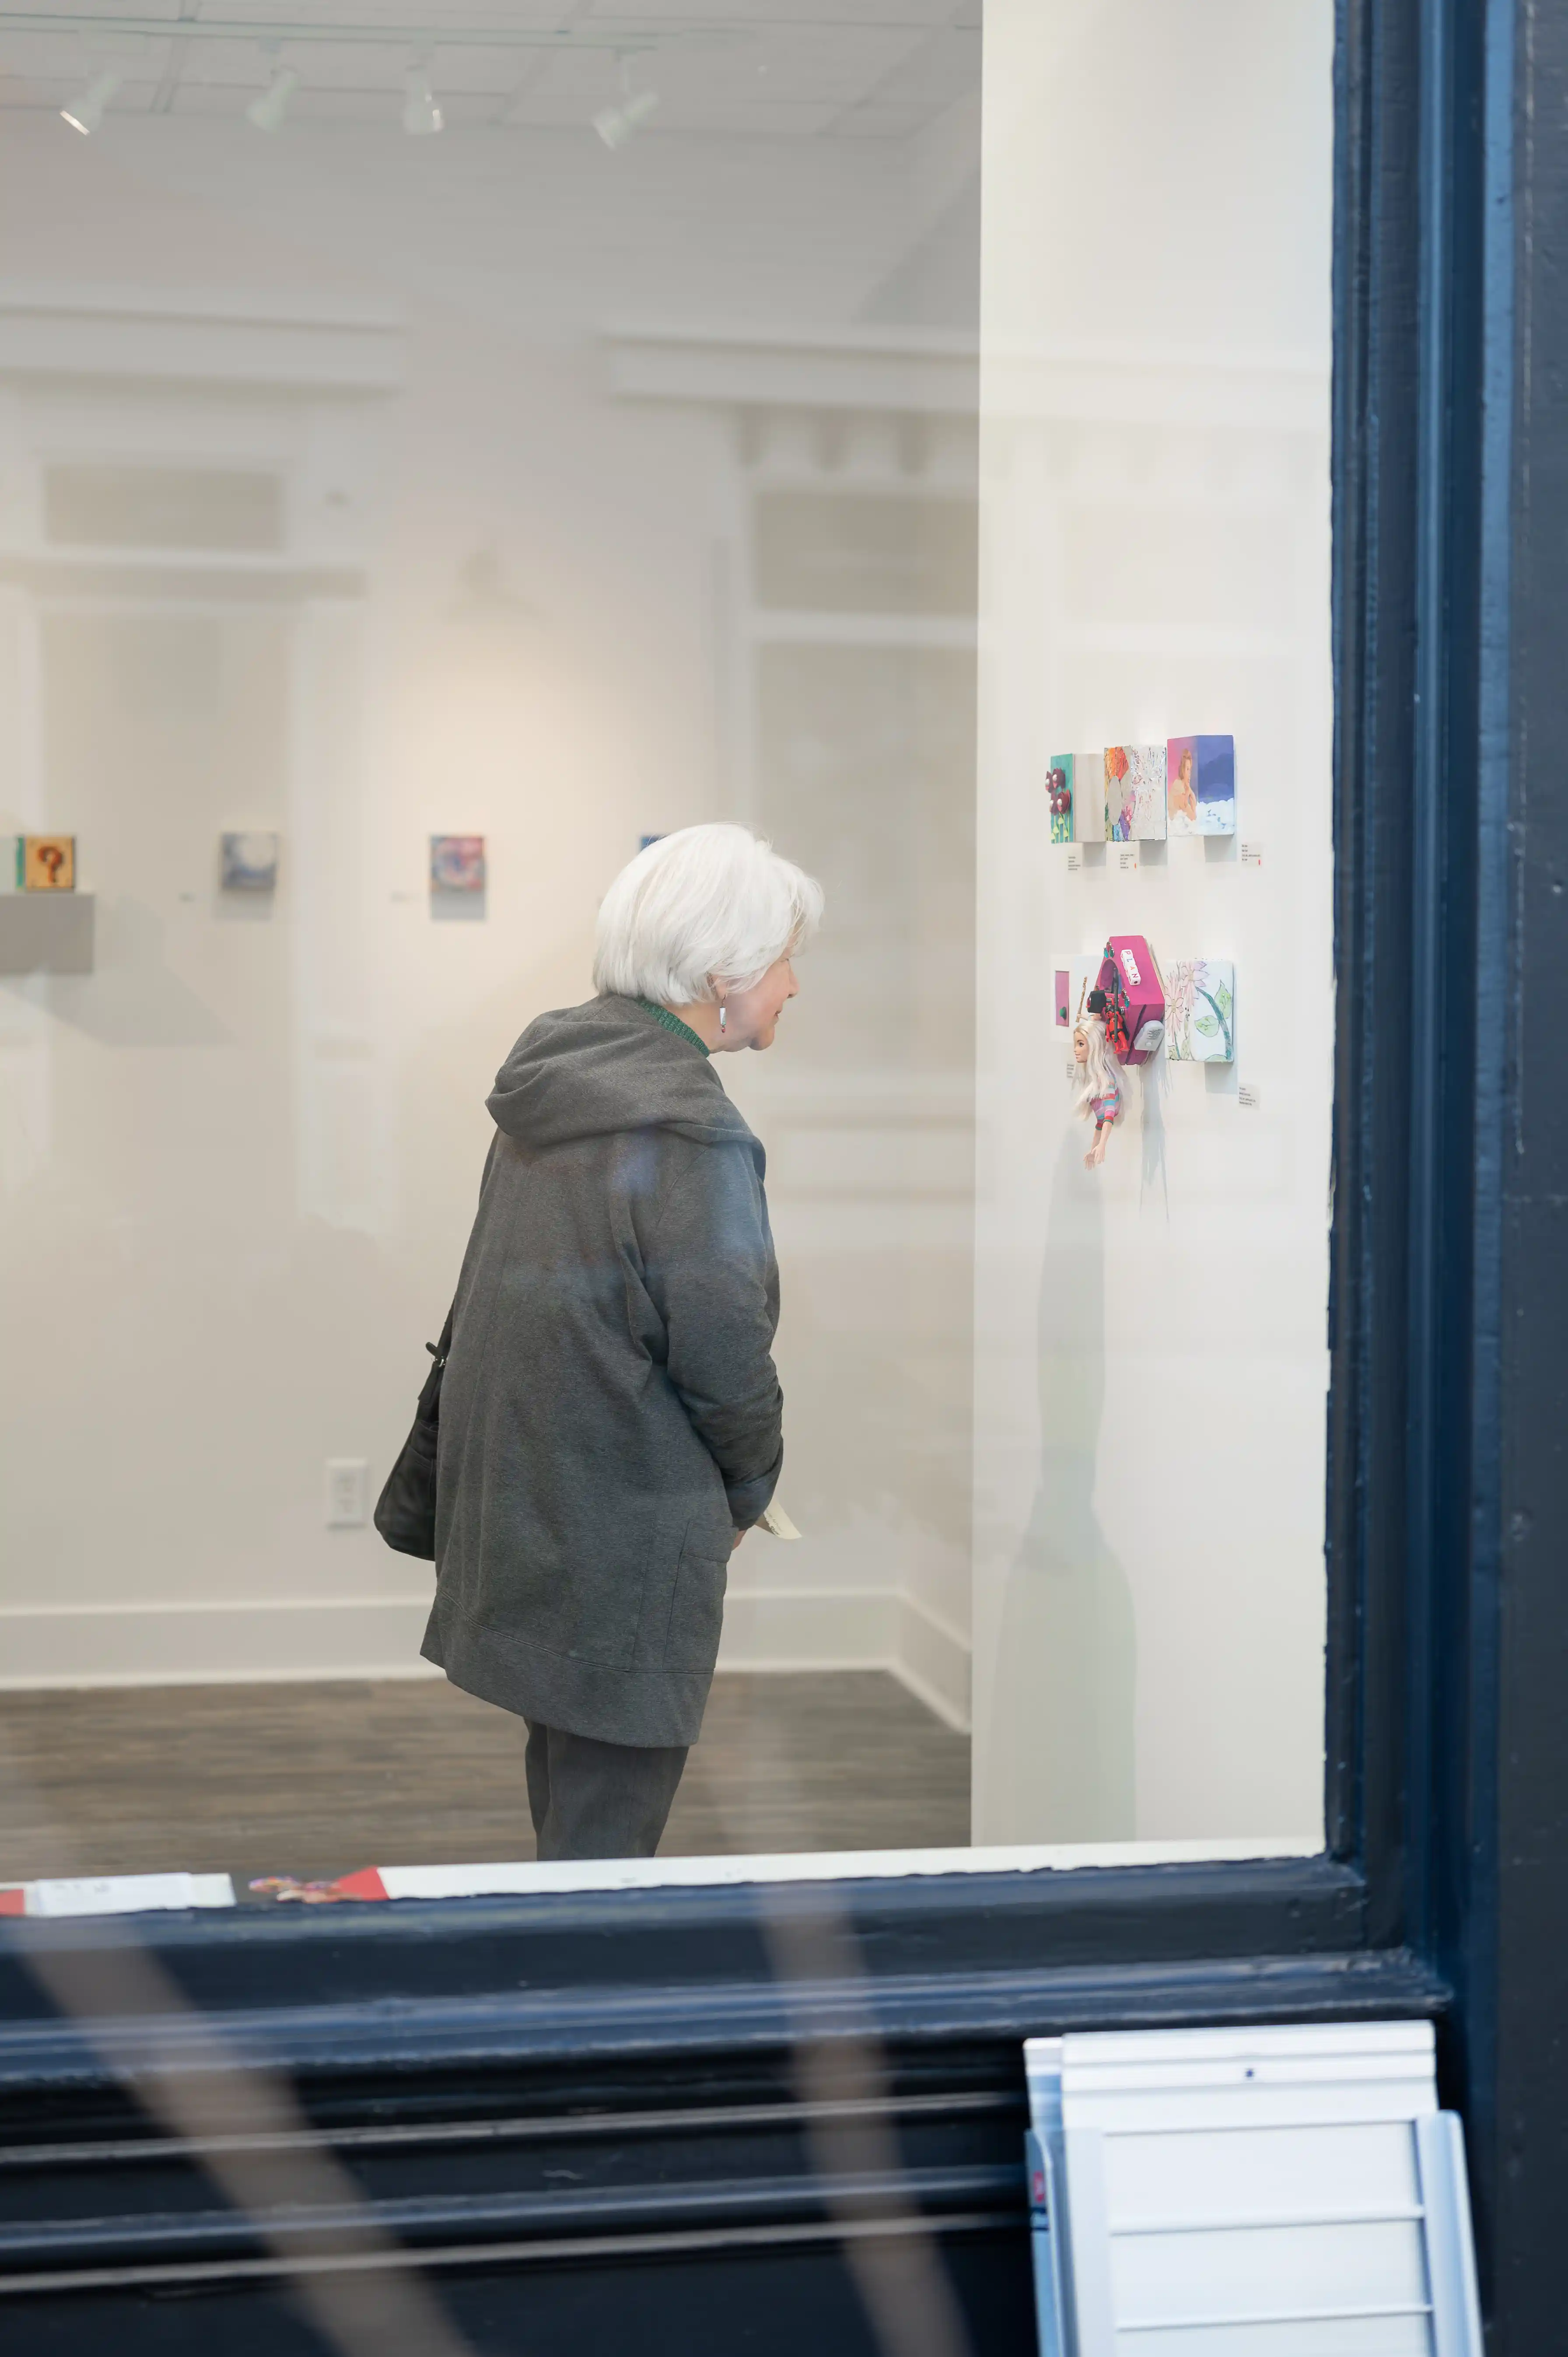 Person viewed through a window, looking at artwork in a gallery setting.